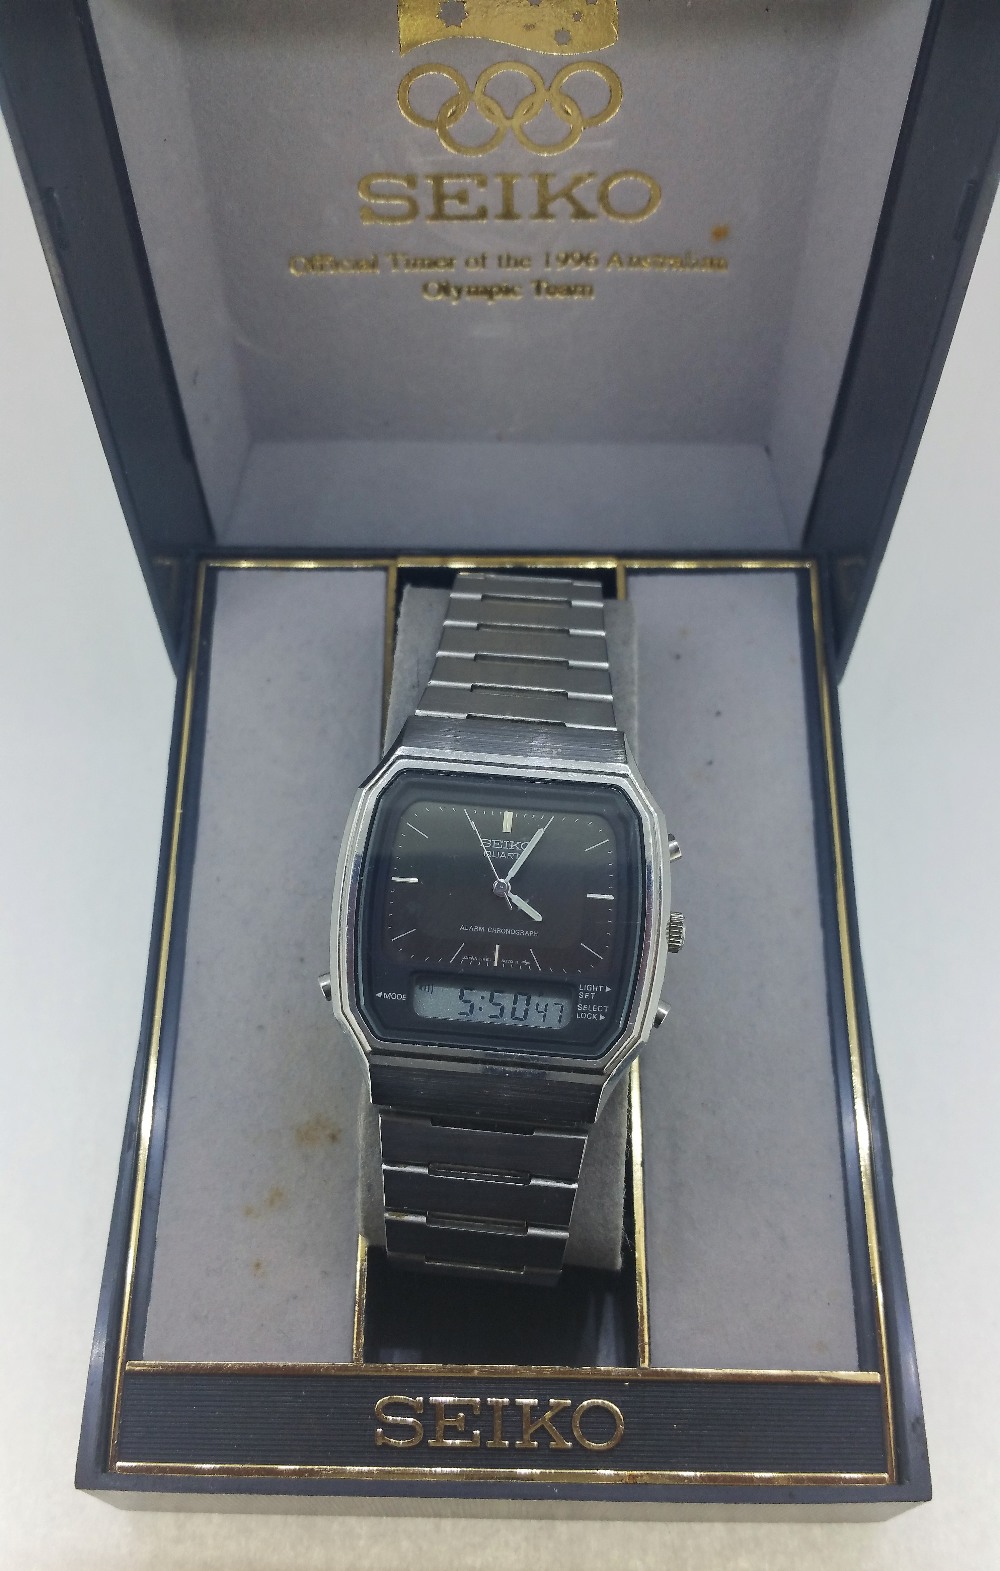 A Seiko Digi-Analogue gents steel cased watch model H461-5050.